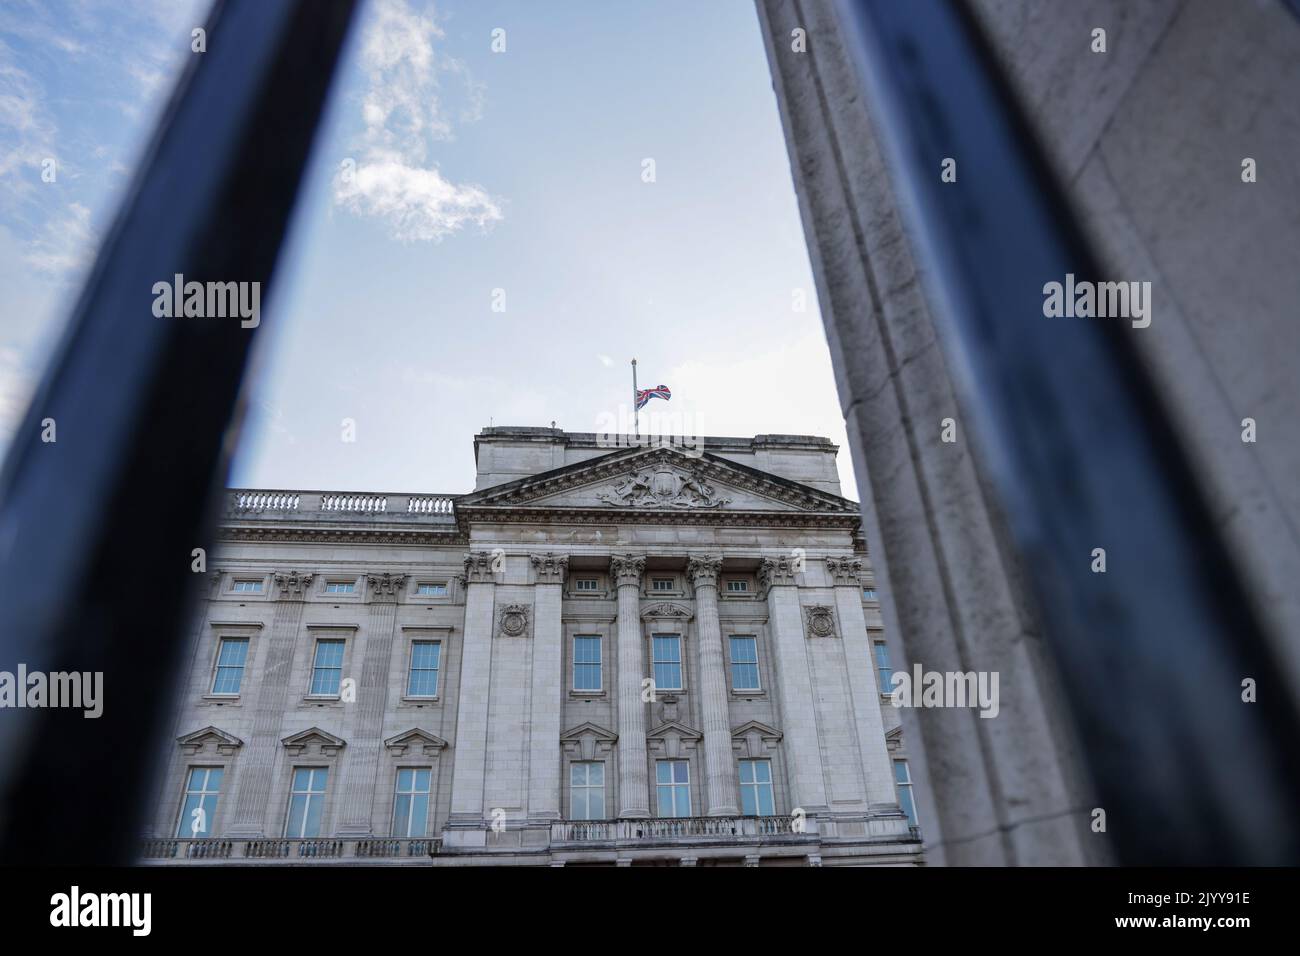 London, UK. 08th Sep, 2022. The Union Jack Flag is flown at half mast at Buckingham Palace as an announcement is made that Queen Elizabeth II, the UK's longest-reigning monarch, has died at the age of 96; She died peacefully at Balmoral Castle in Scotland. Credit: SOPA Images Limited/Alamy Live News Stock Photo